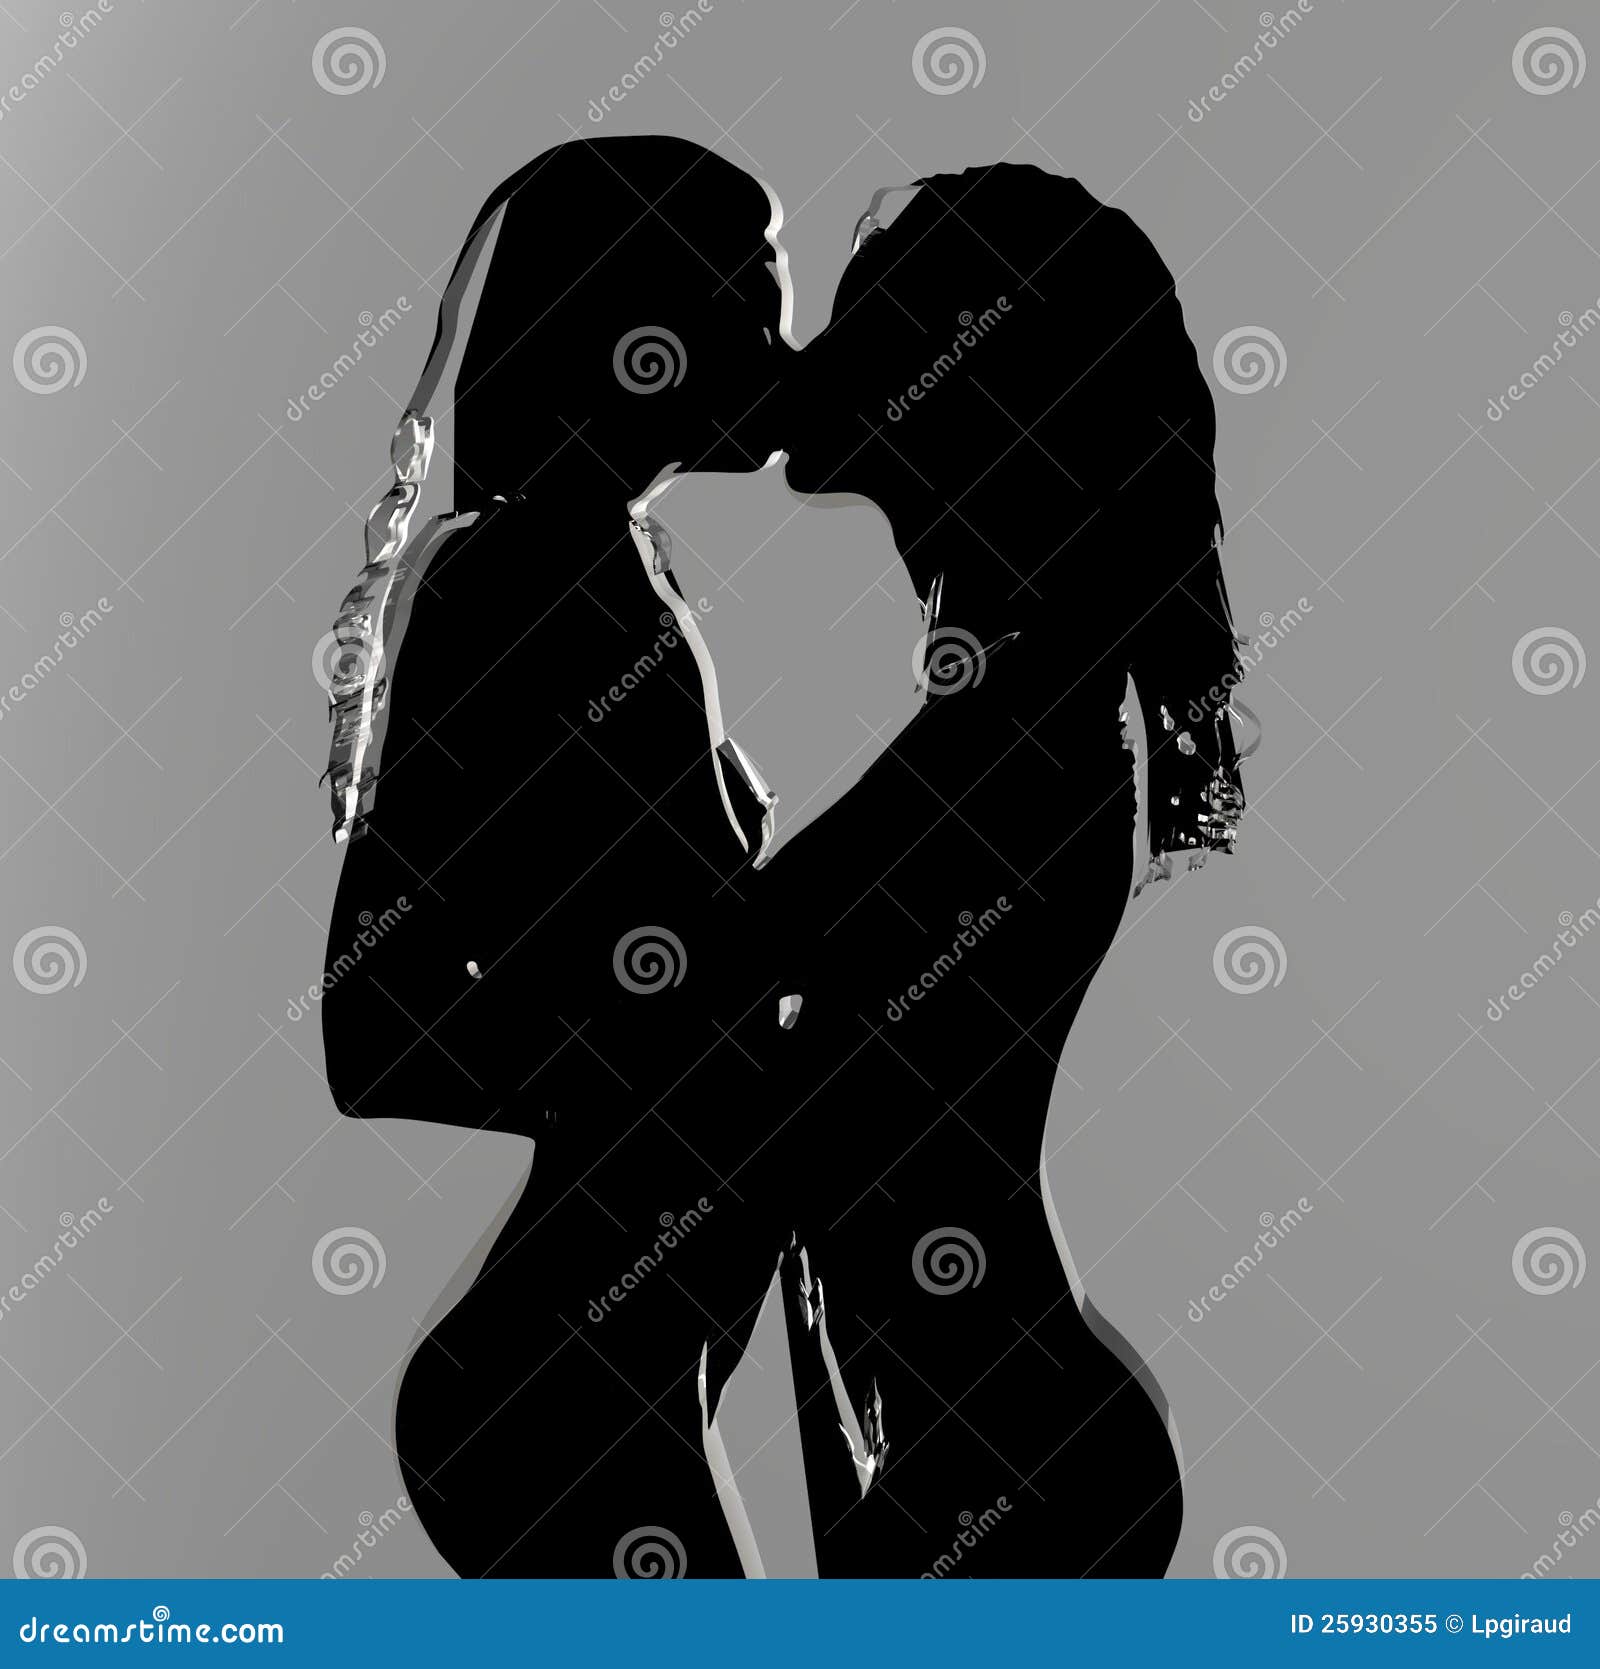 Lesbian Kiss Royalty Free Stock Photo Image 29025 Hot Sex Picture pic